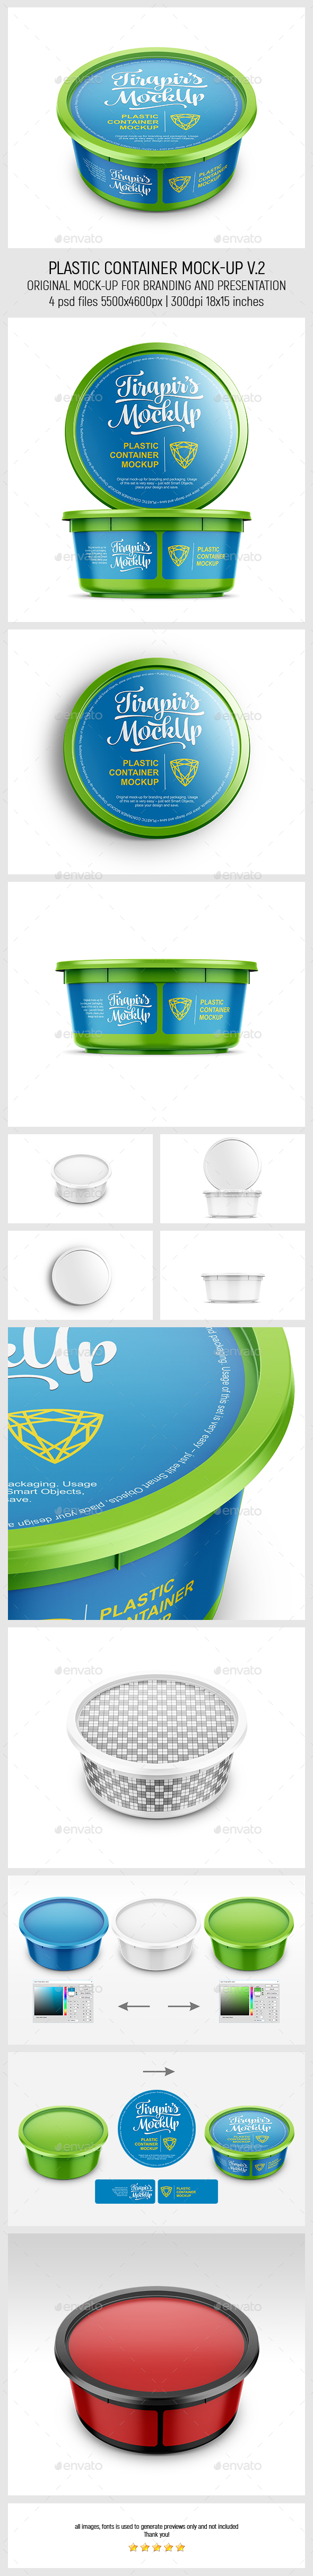 GraphicRiver Plastic Container Mock-Up V.2 20811745